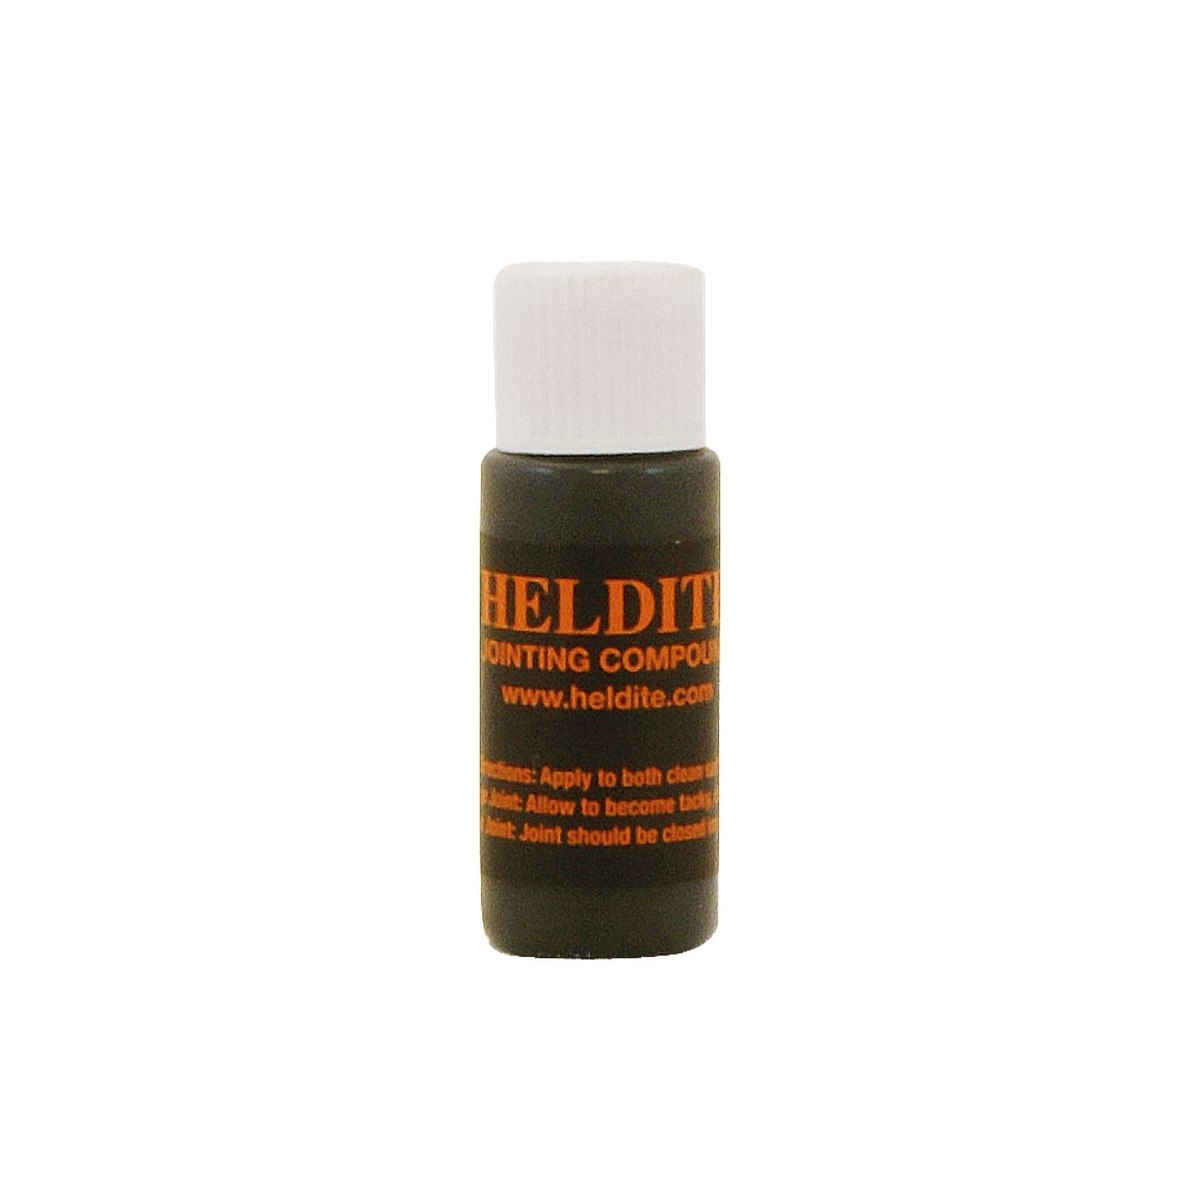 Heldite Jointing Compound 7ml